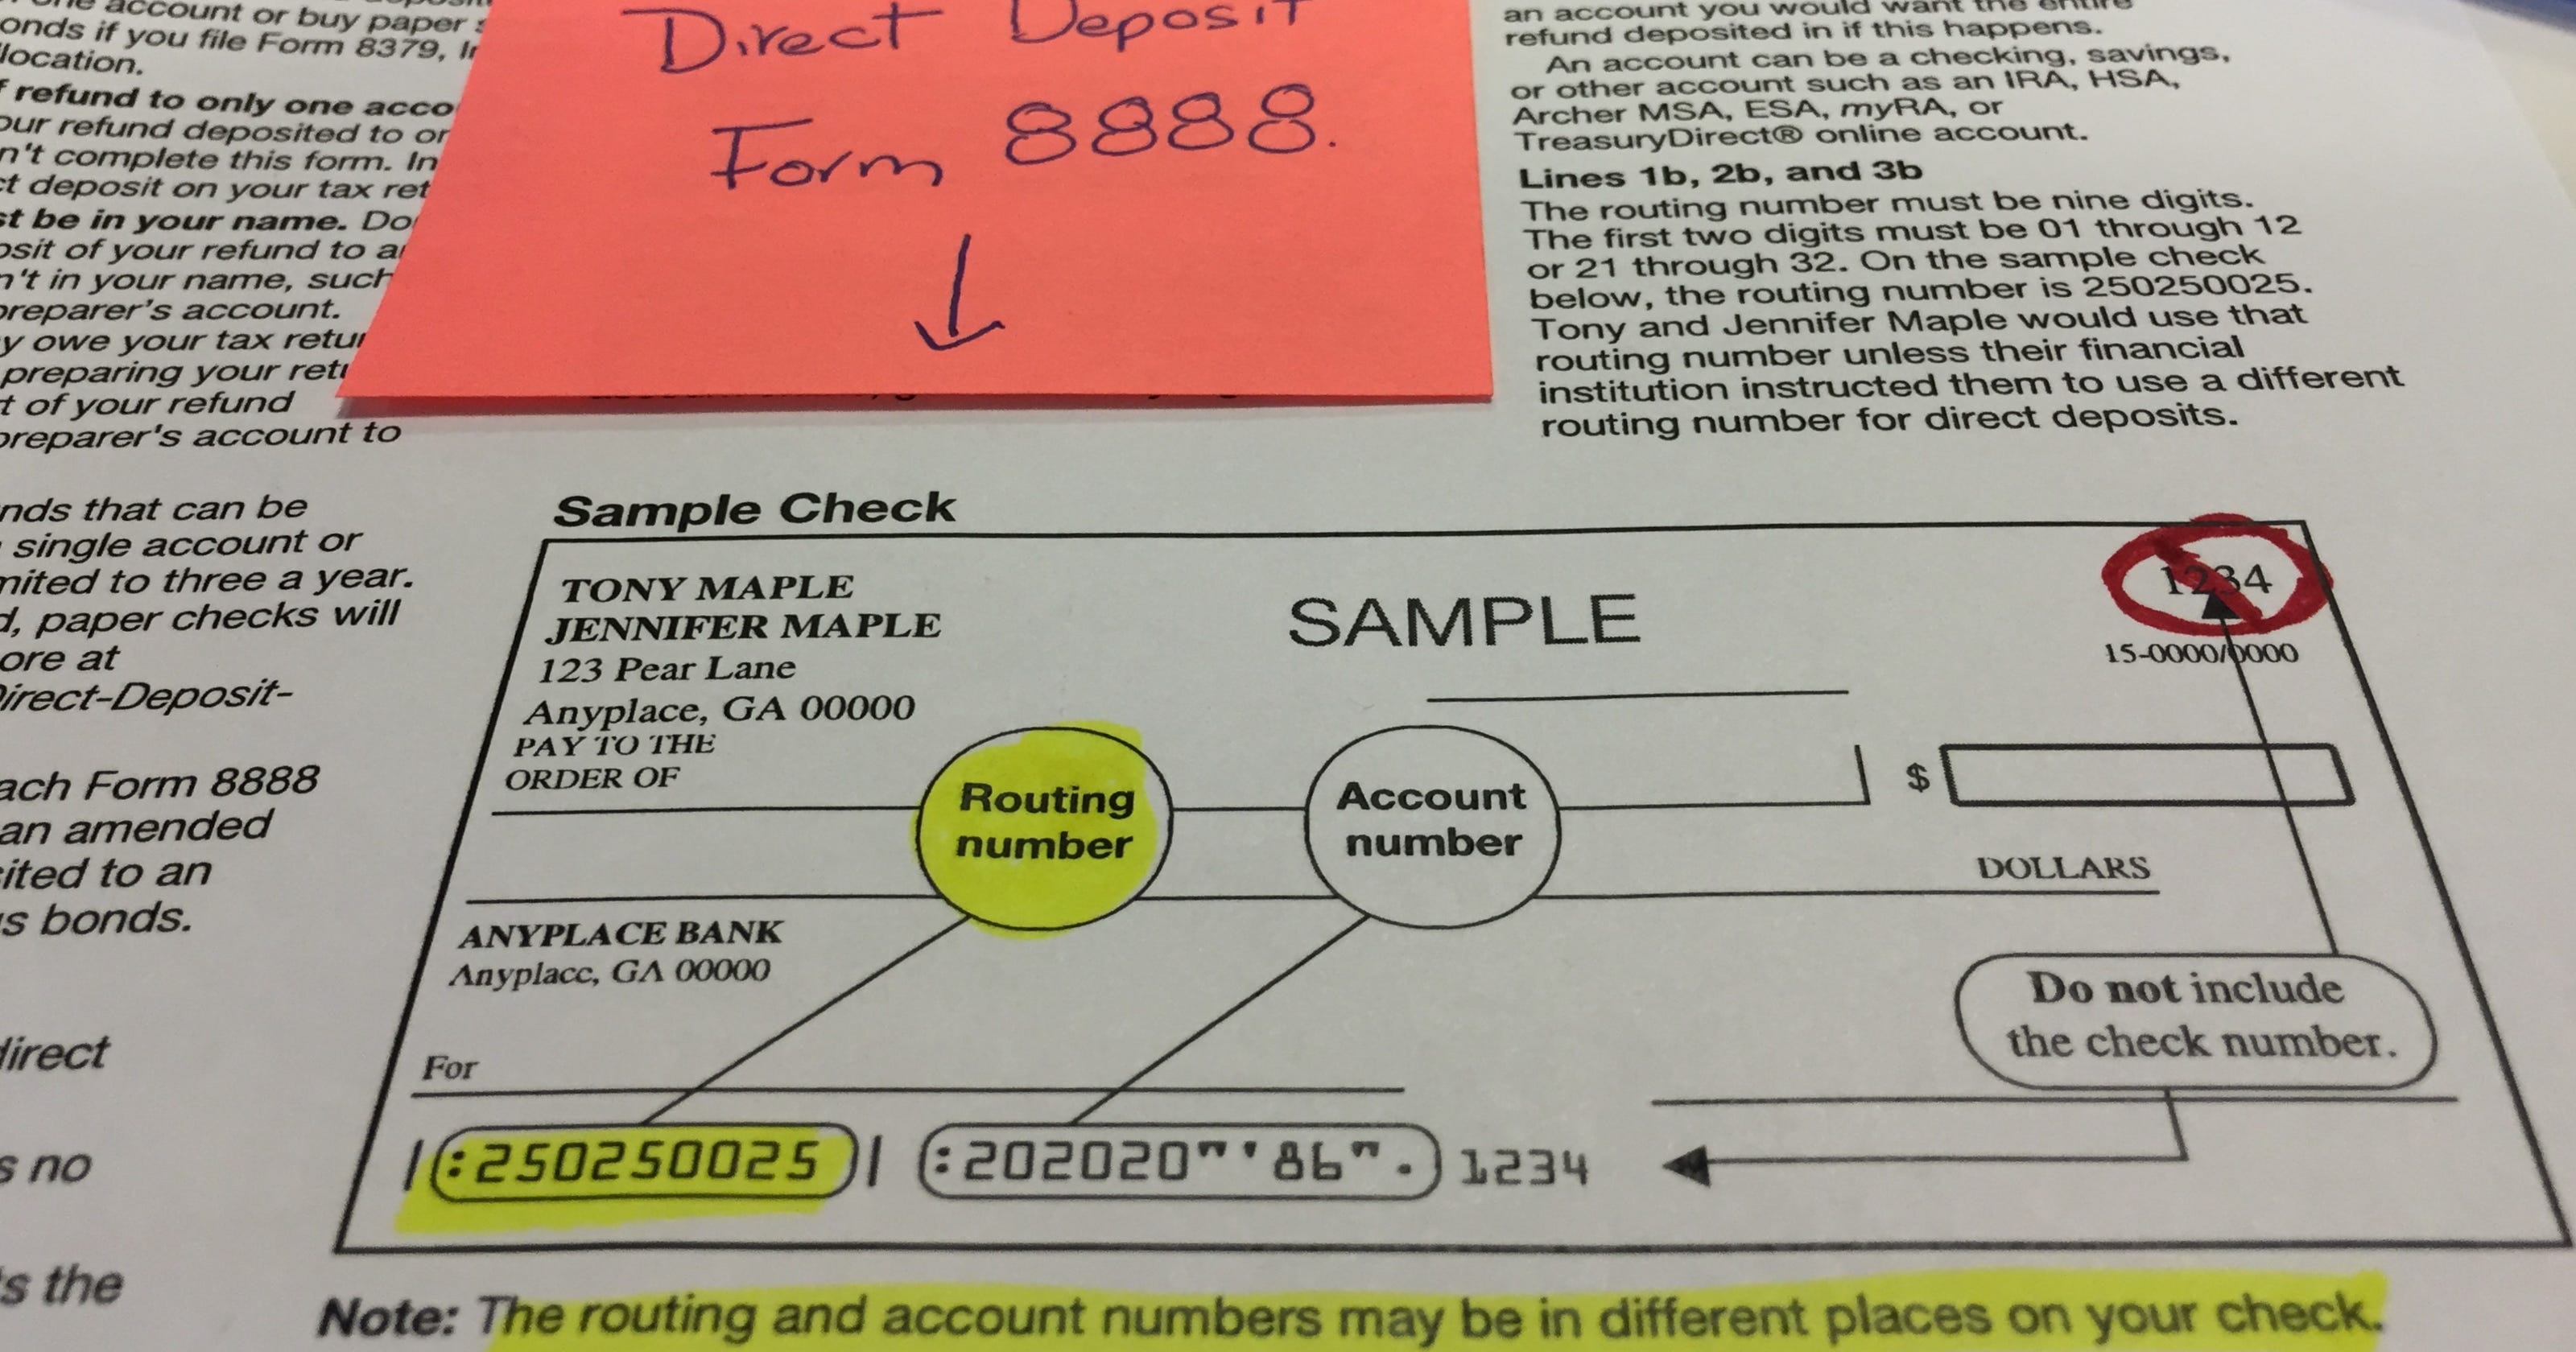 direct deposit for tax refunds can go very wrong